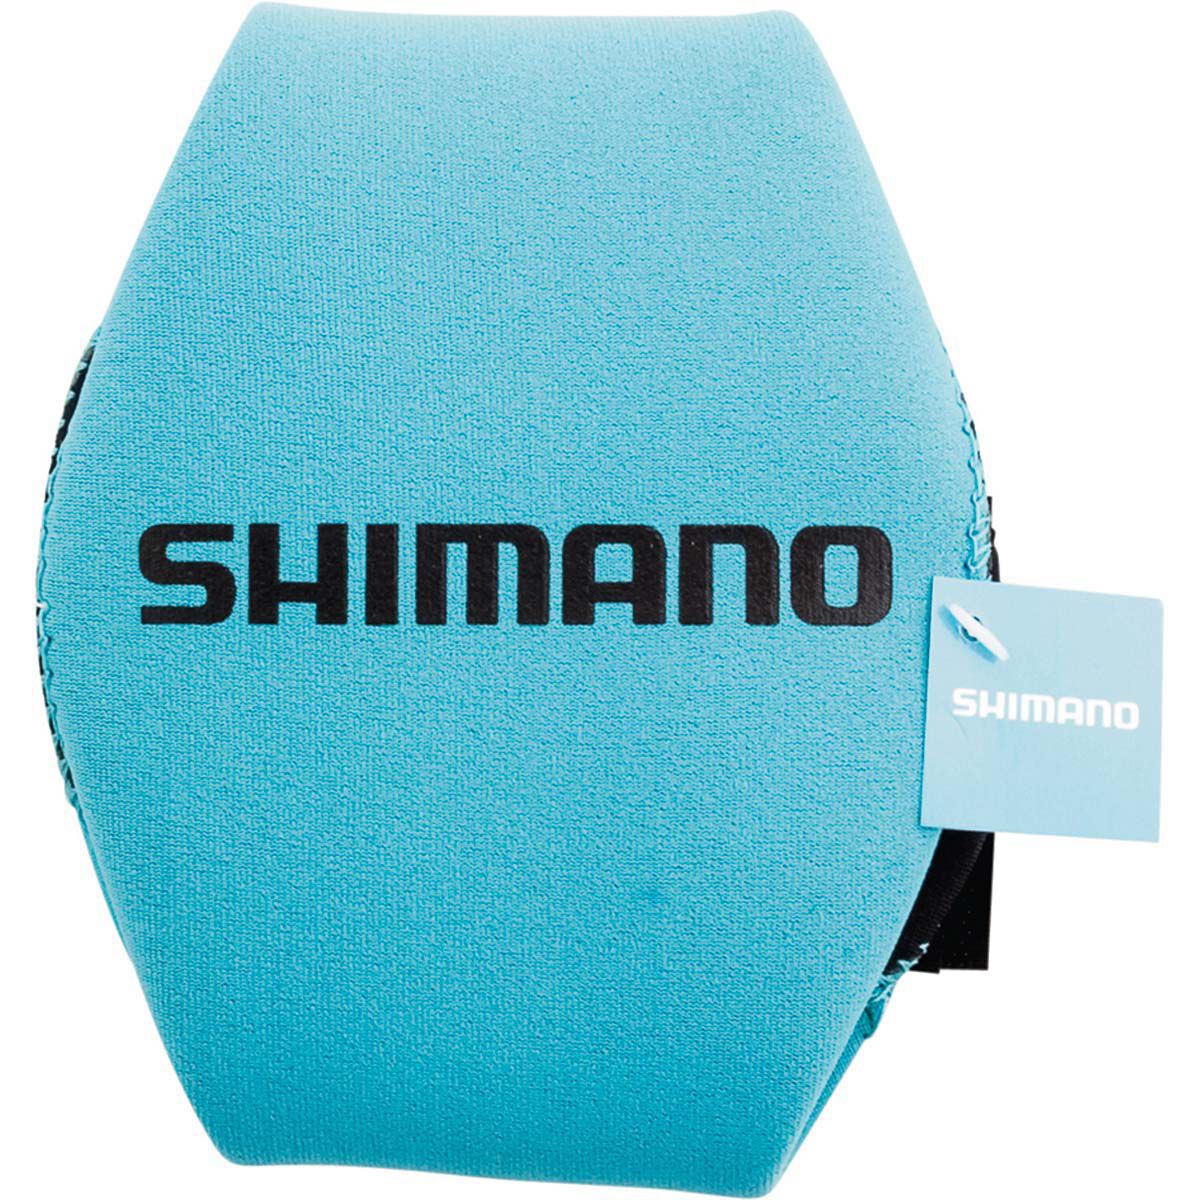 Shimano Reel Cover Size Chart